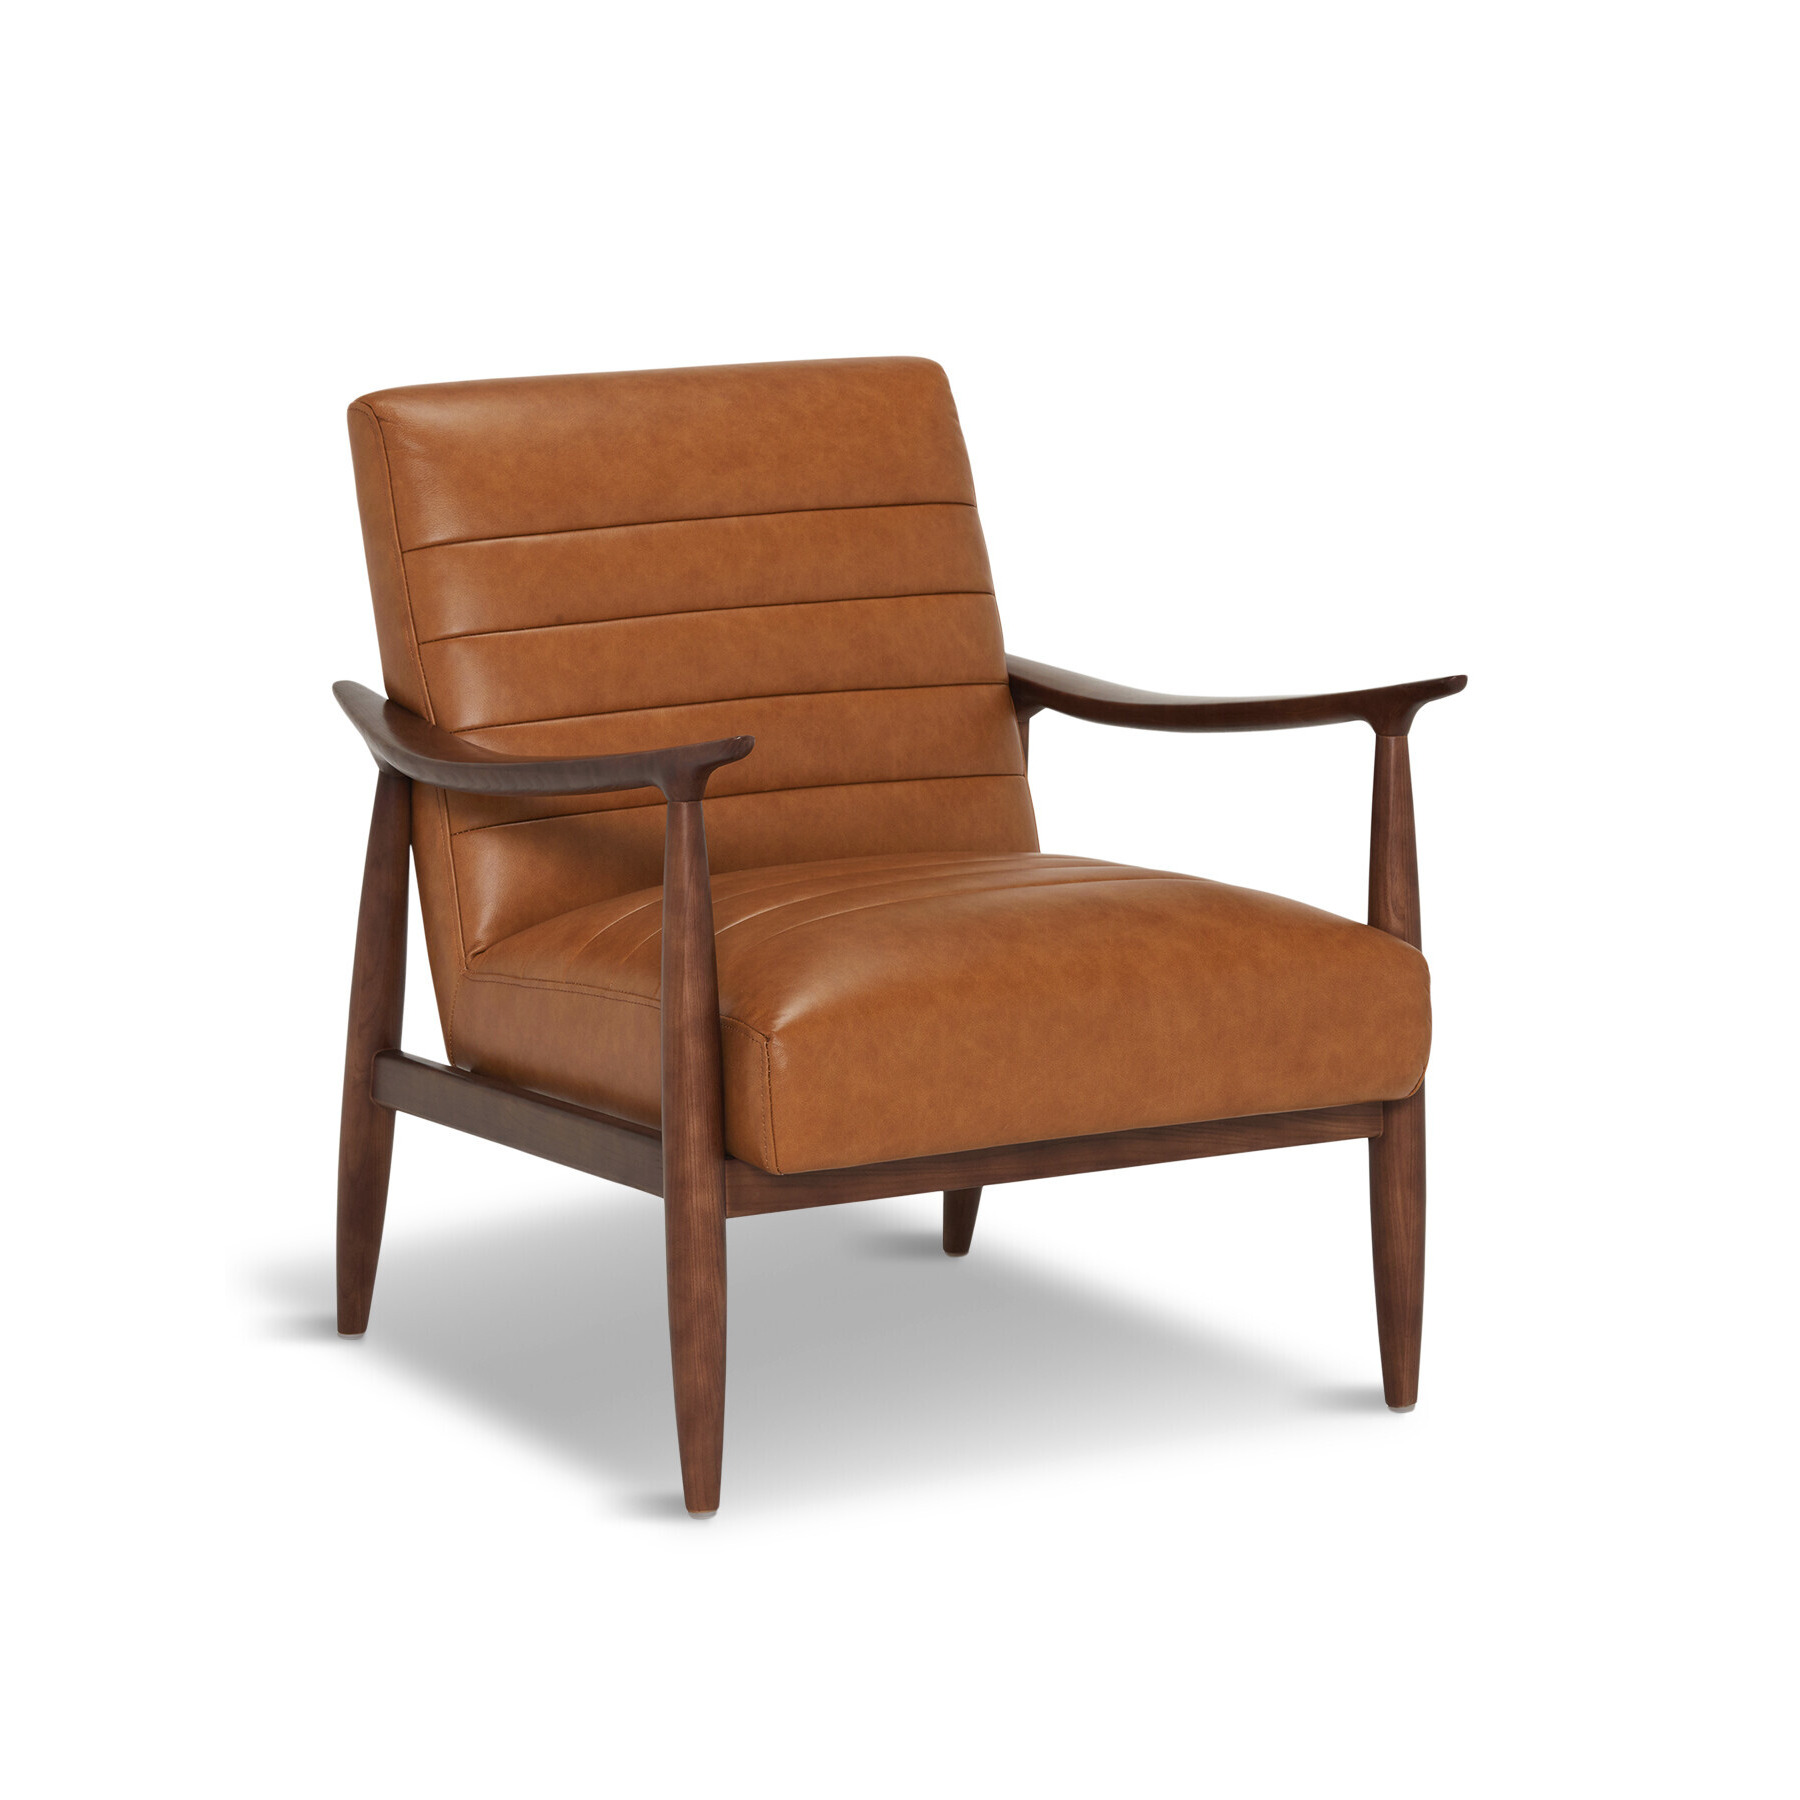 Barker and Stonehouse Hockney Brown Leather Armchair - image 1